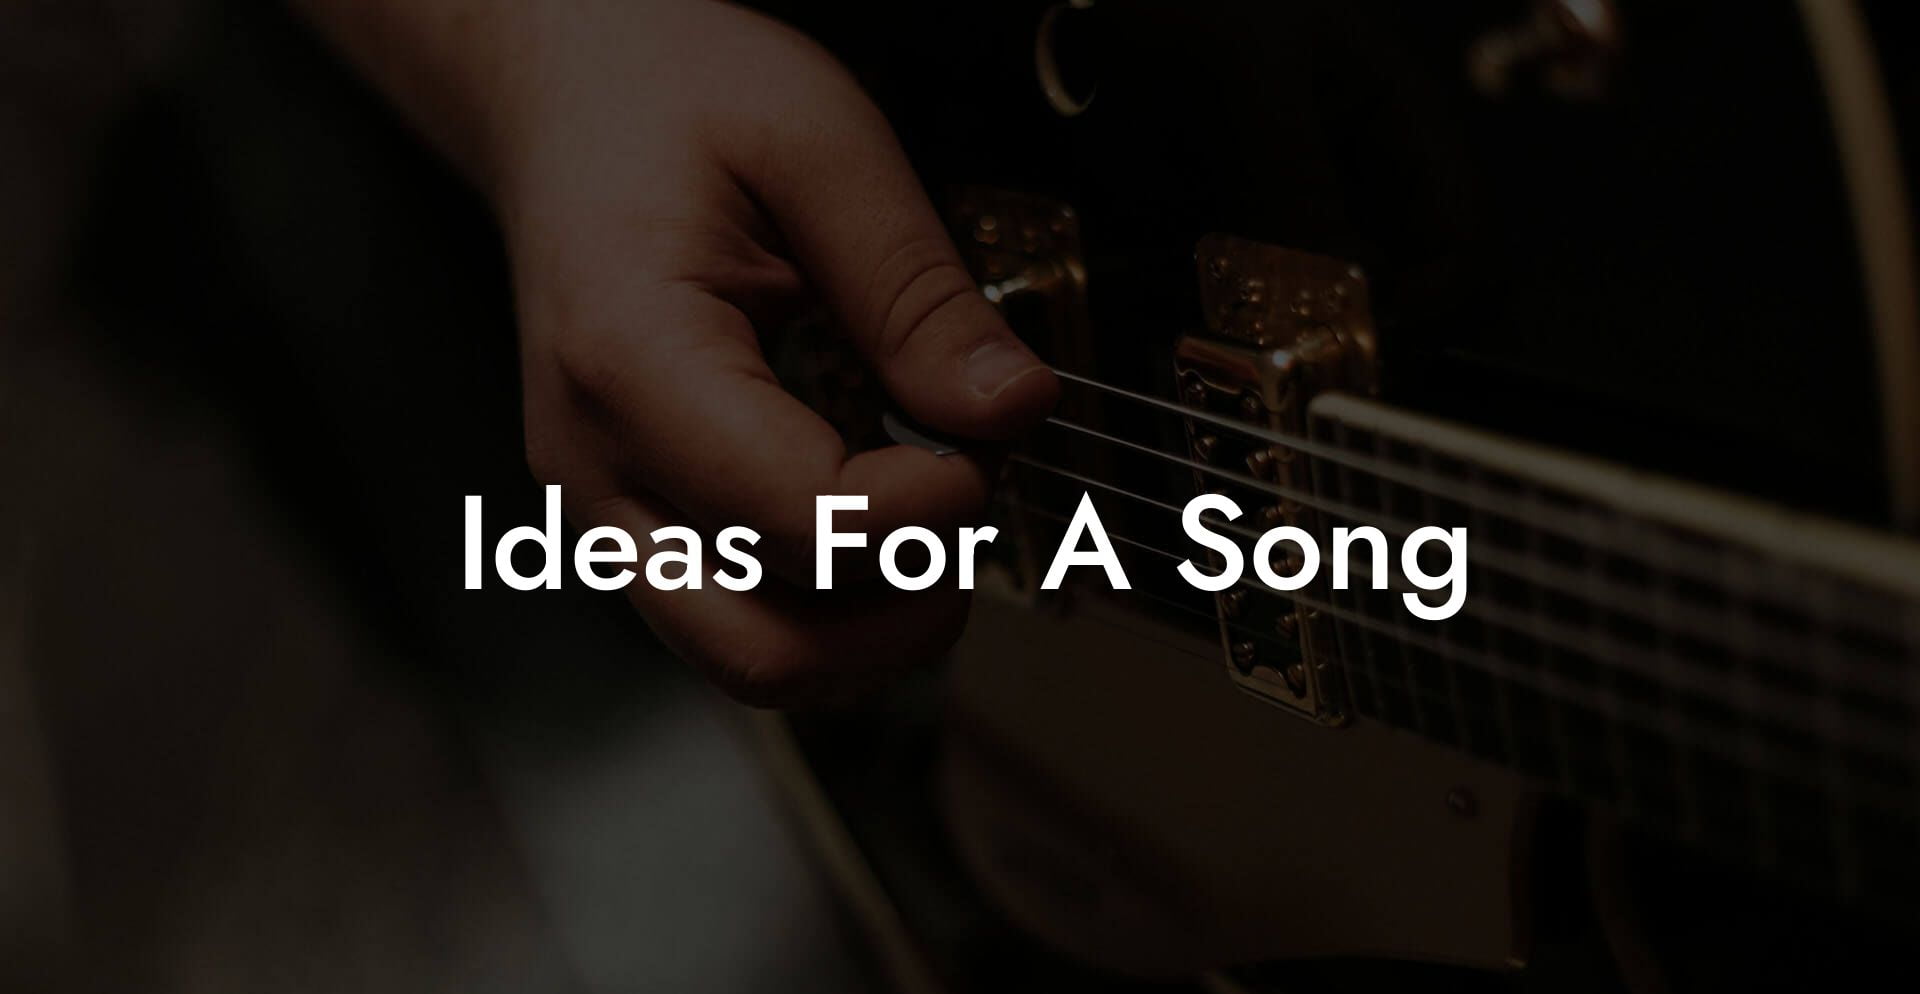 ideas for a song lyric assistant